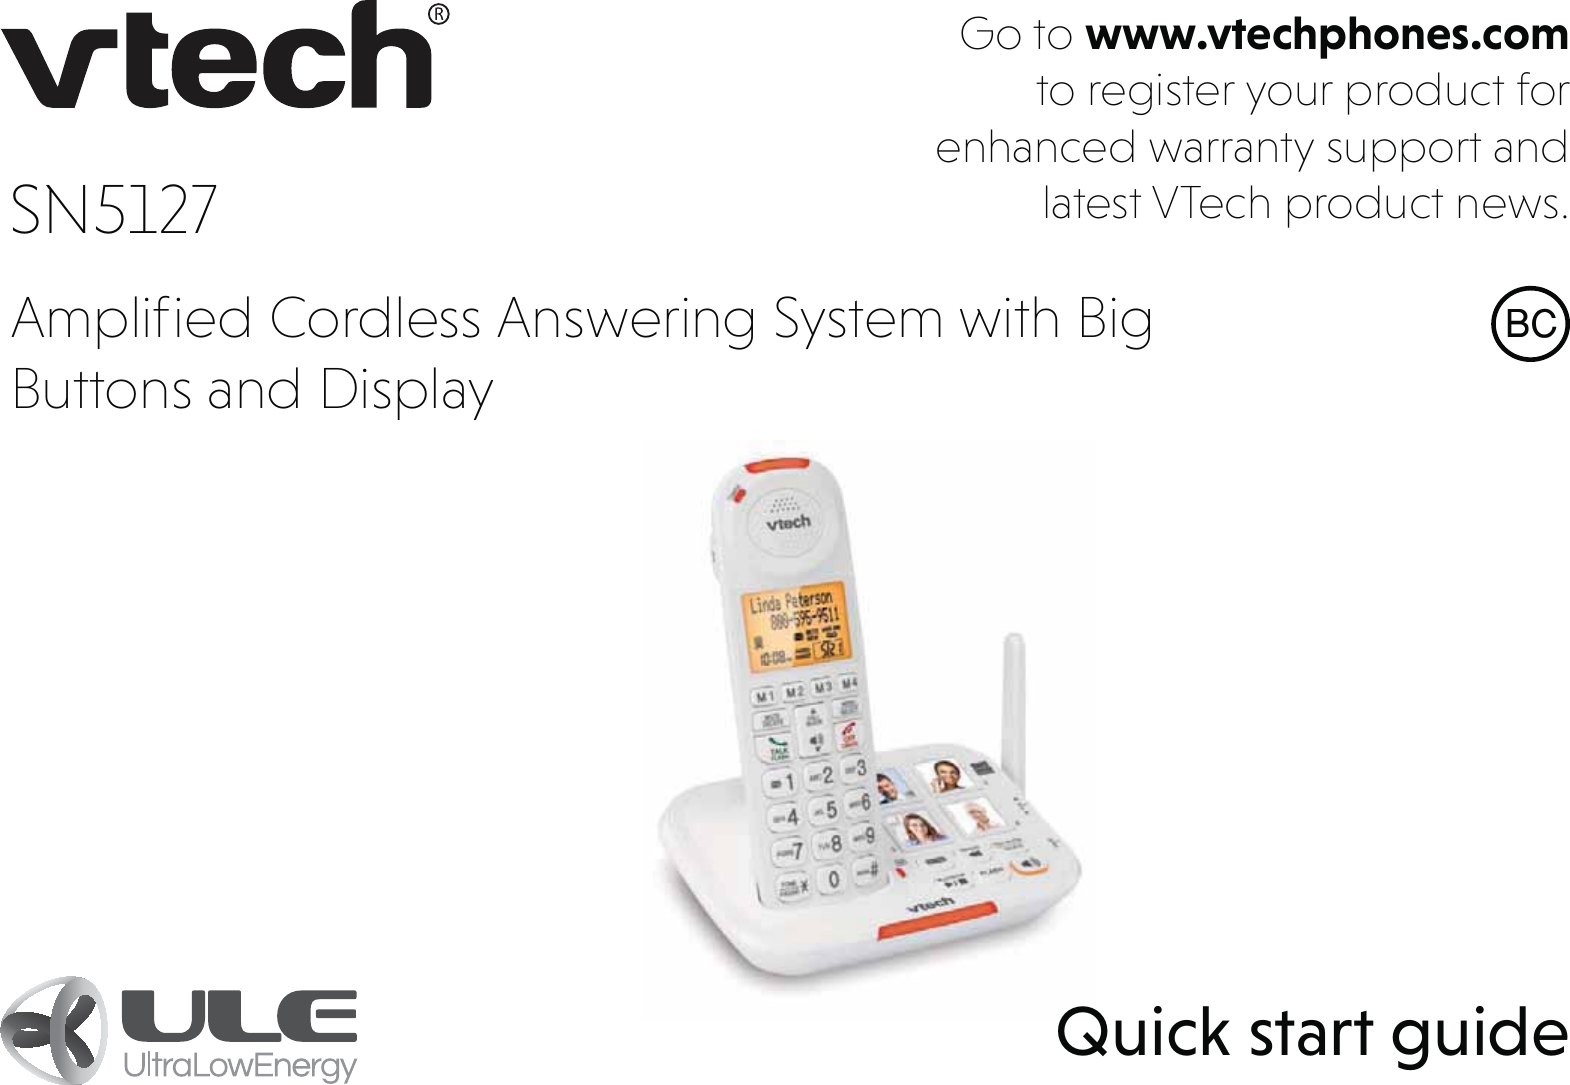 Go to www.vtechphones.com to register your product for enhanced warranty support and latest VTech product news.Quick start guide%&amp;SN5127 Ampliﬁed Cordless Answering System with Big Buttons and Display